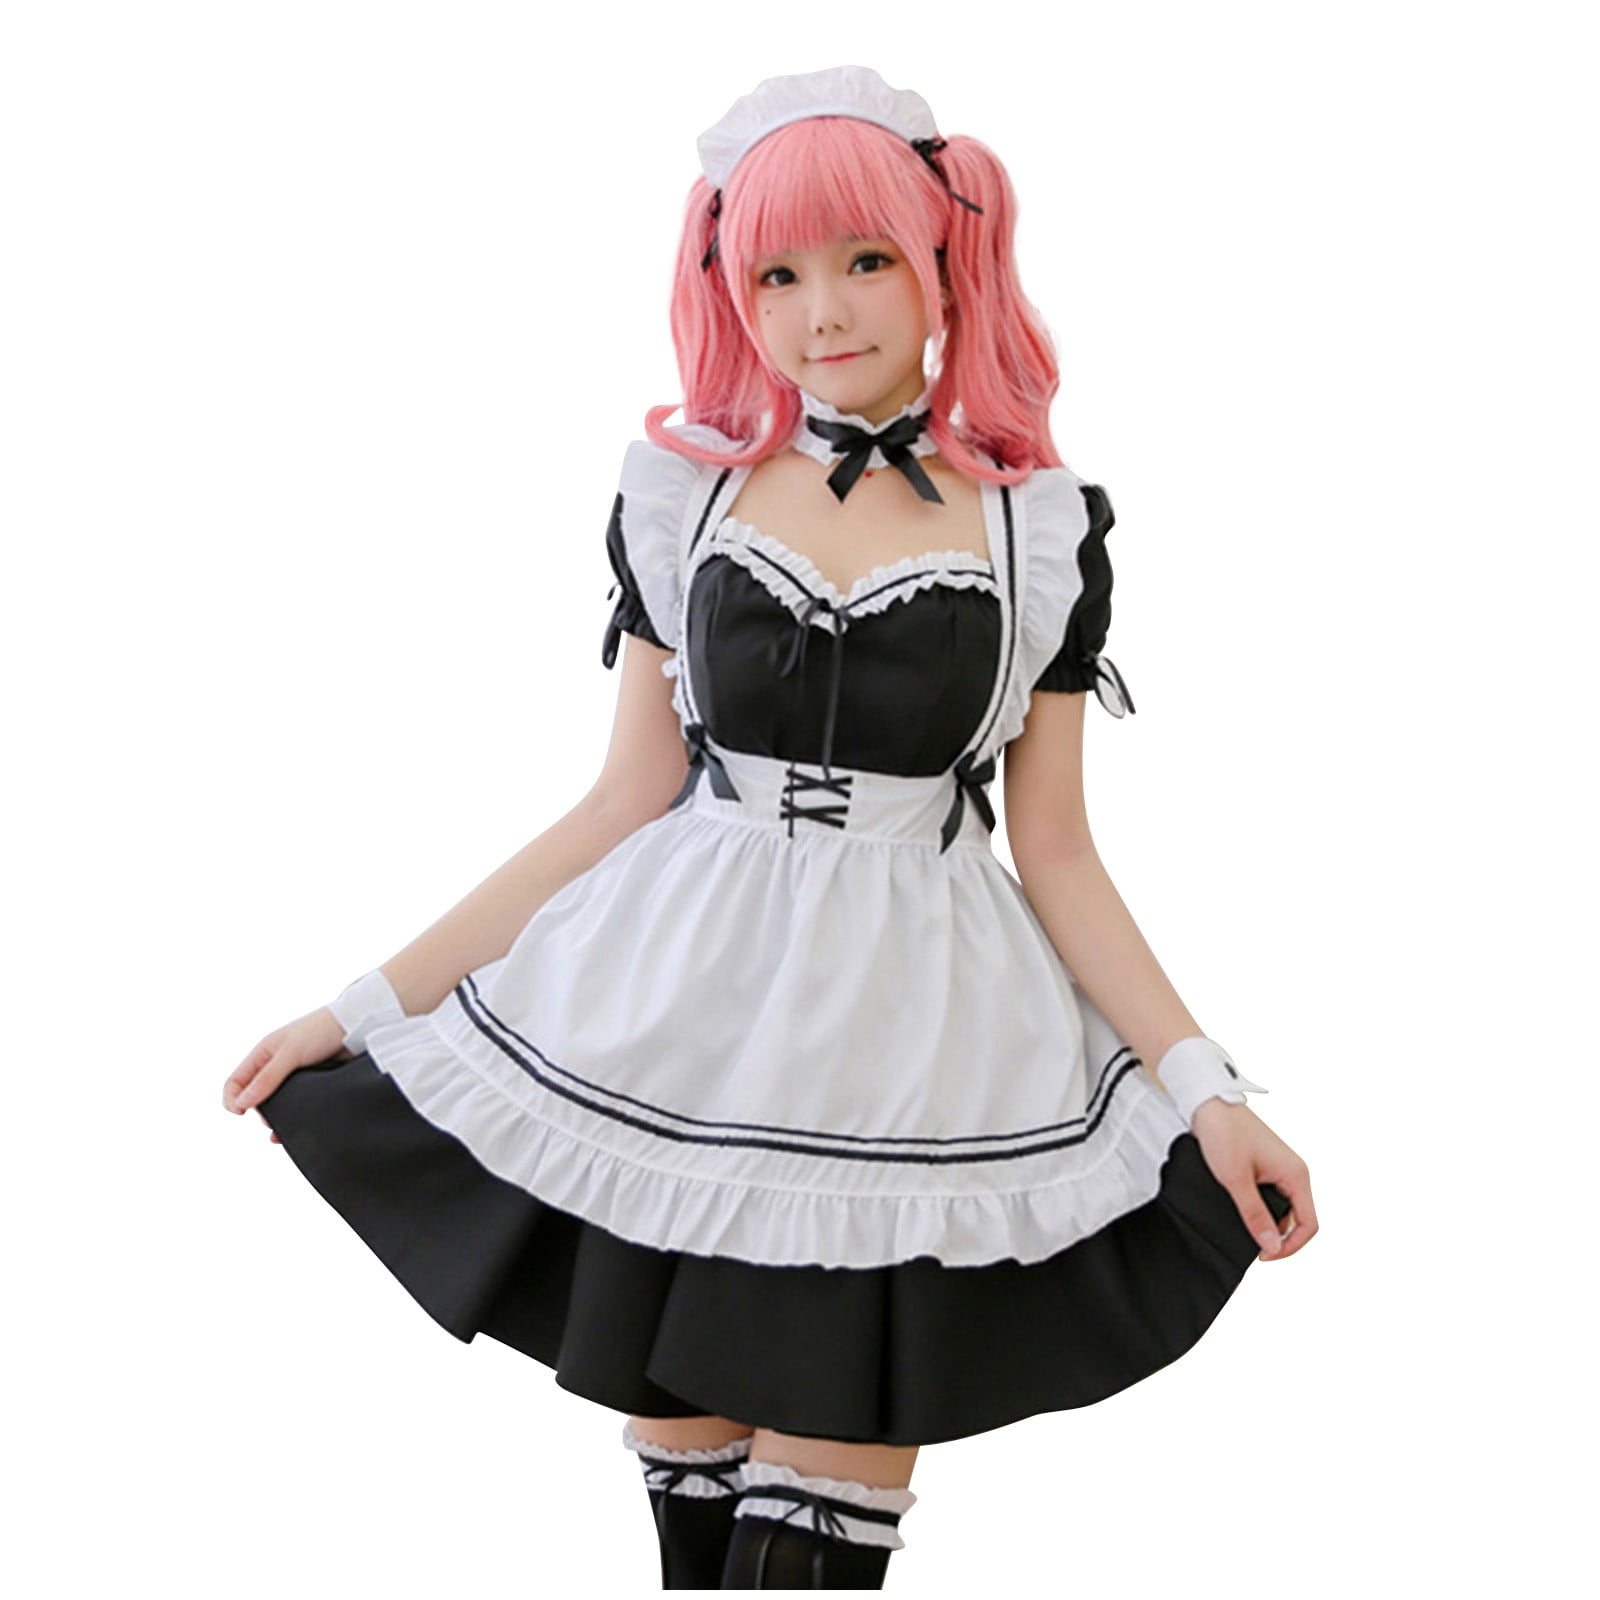 Cute Anime Girl Cosplay Stock Photo Picture And Royalty Free Image Image  21597590